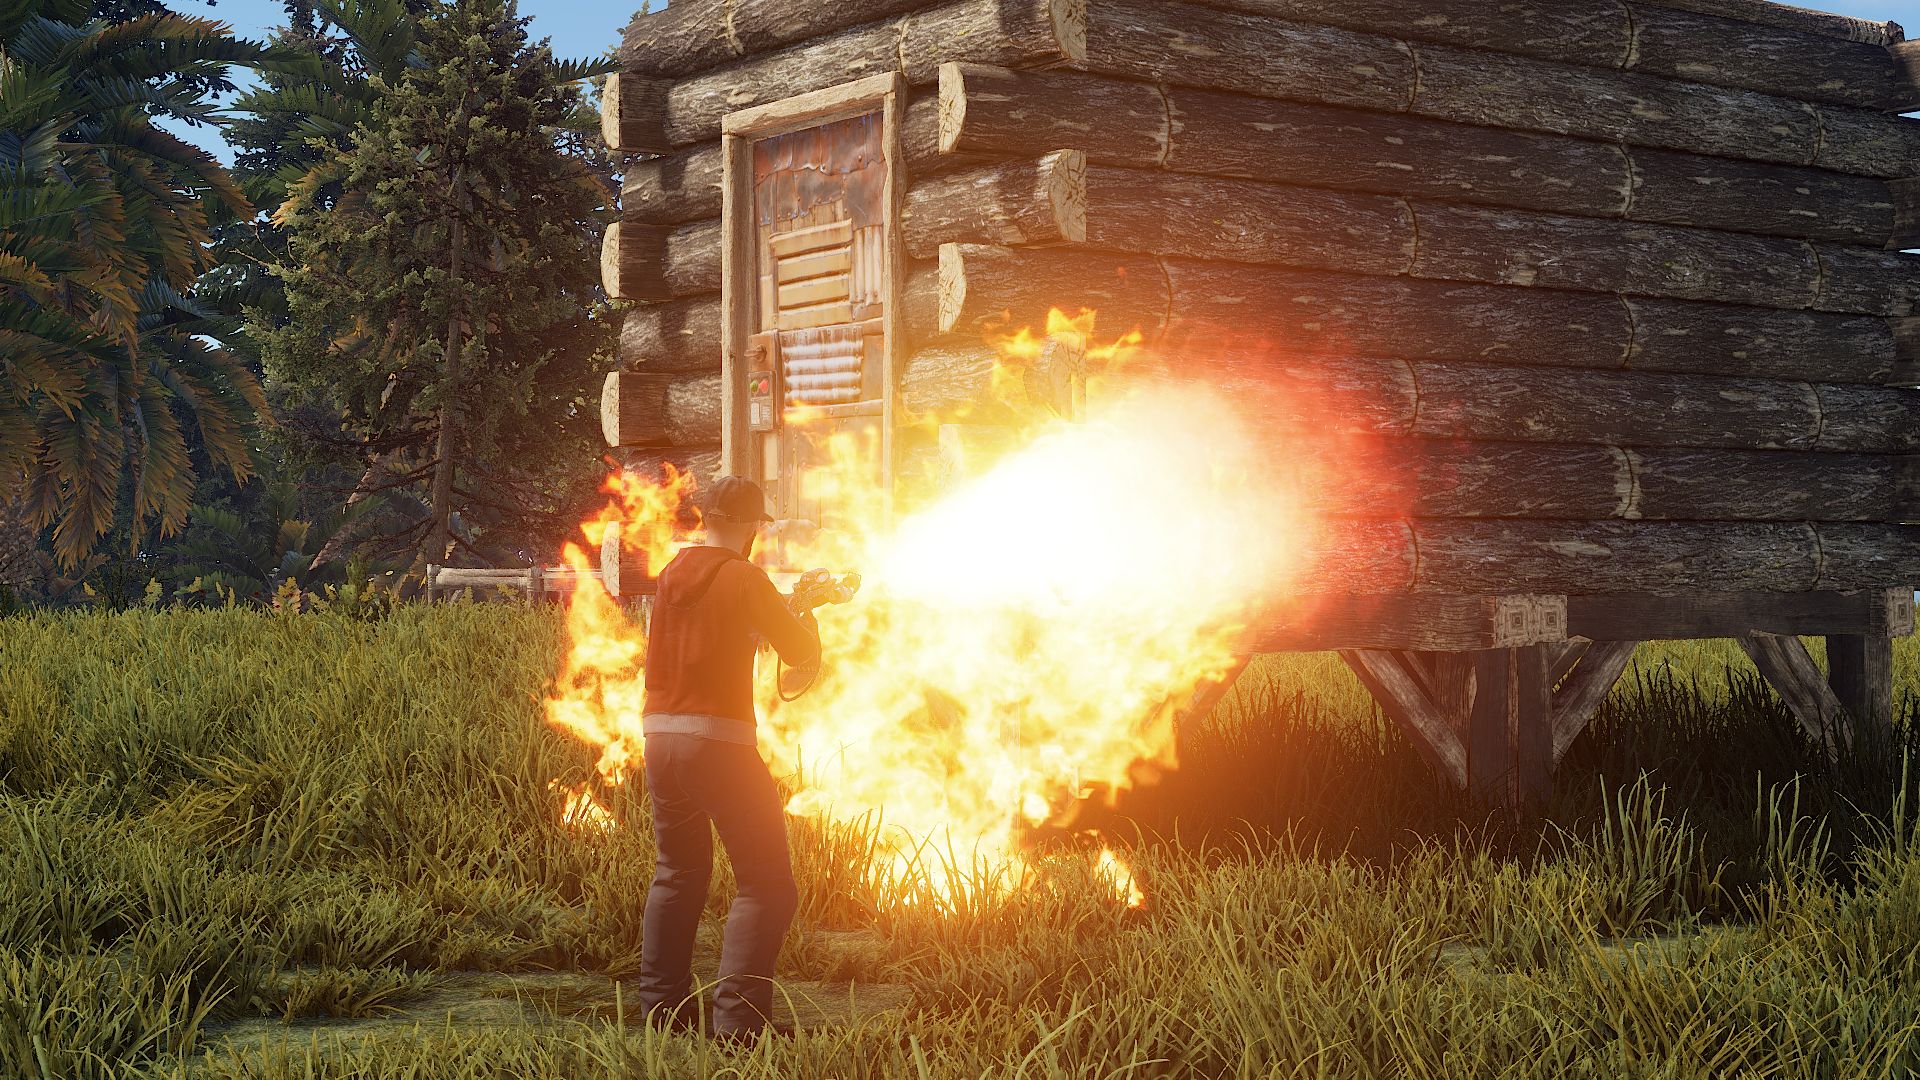 In this article, we are going to provide you with a detailed guide on how to demolish walls in Rust, whether it is your own base walls or other players.